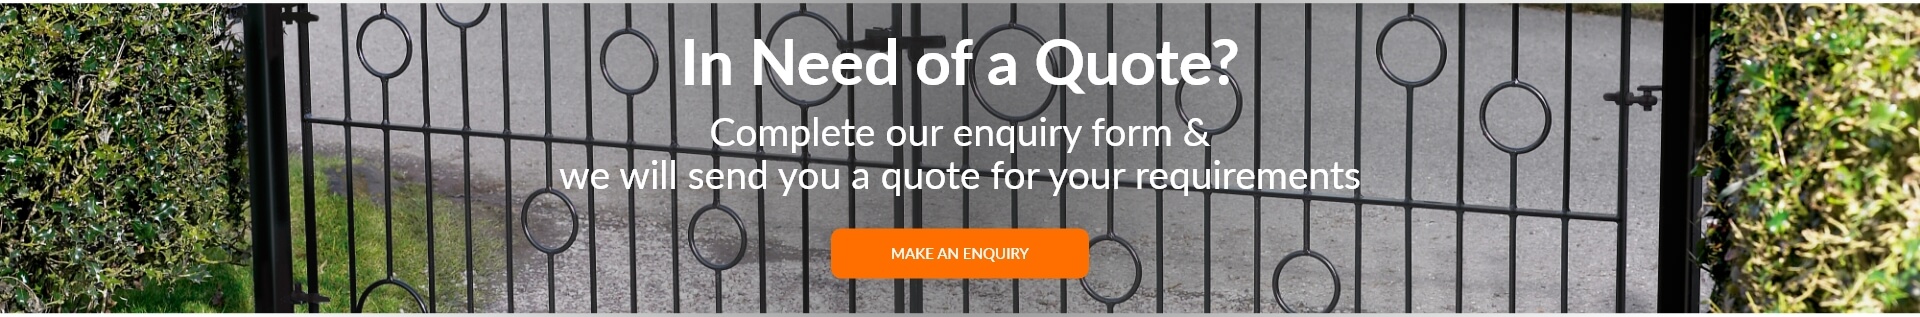 Need a quote? Fill in the enquiry form